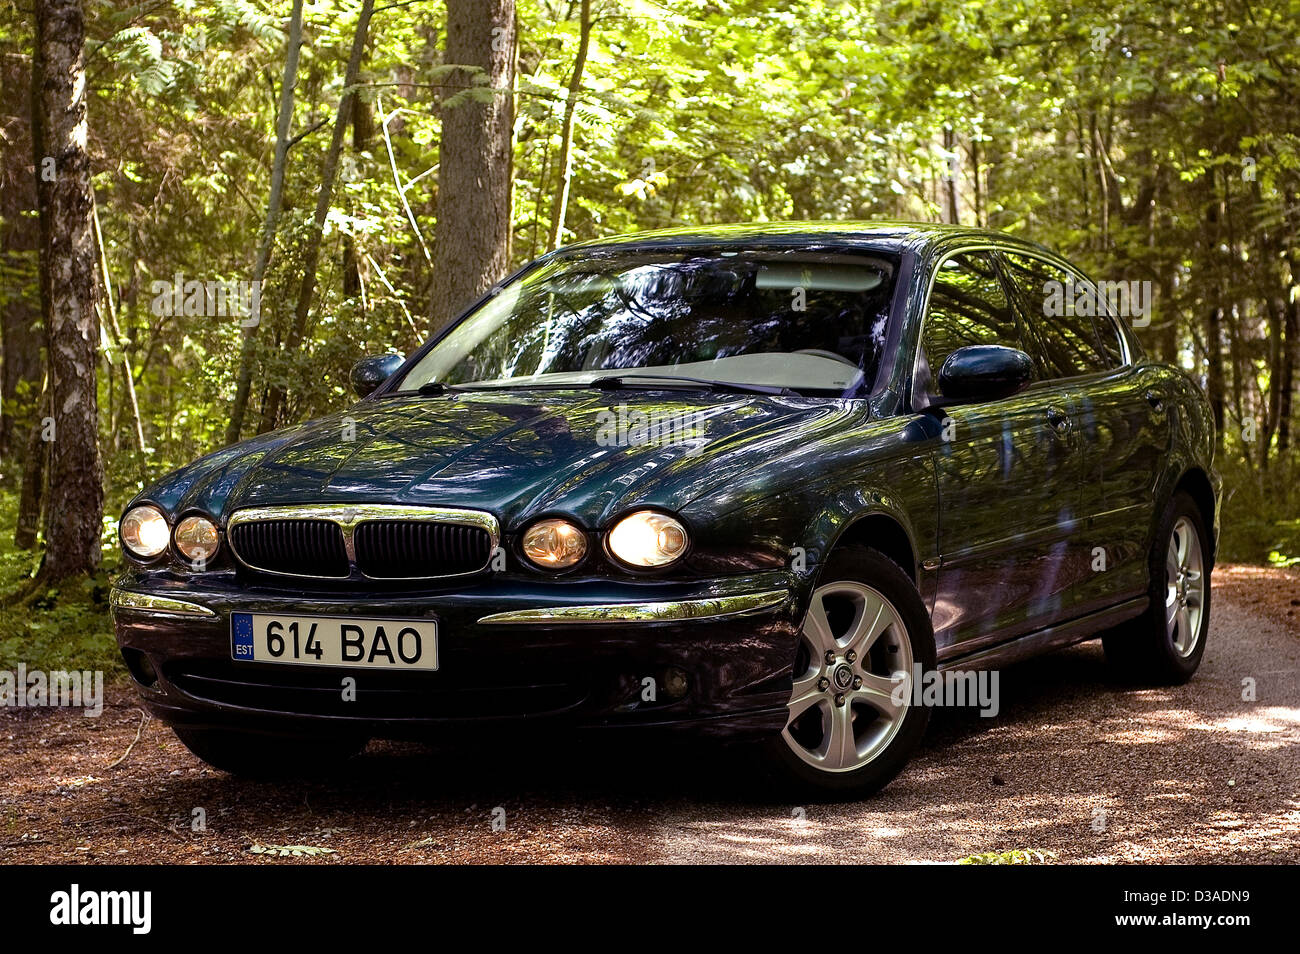 Jaguar X-Type in a nice background Stock Photo